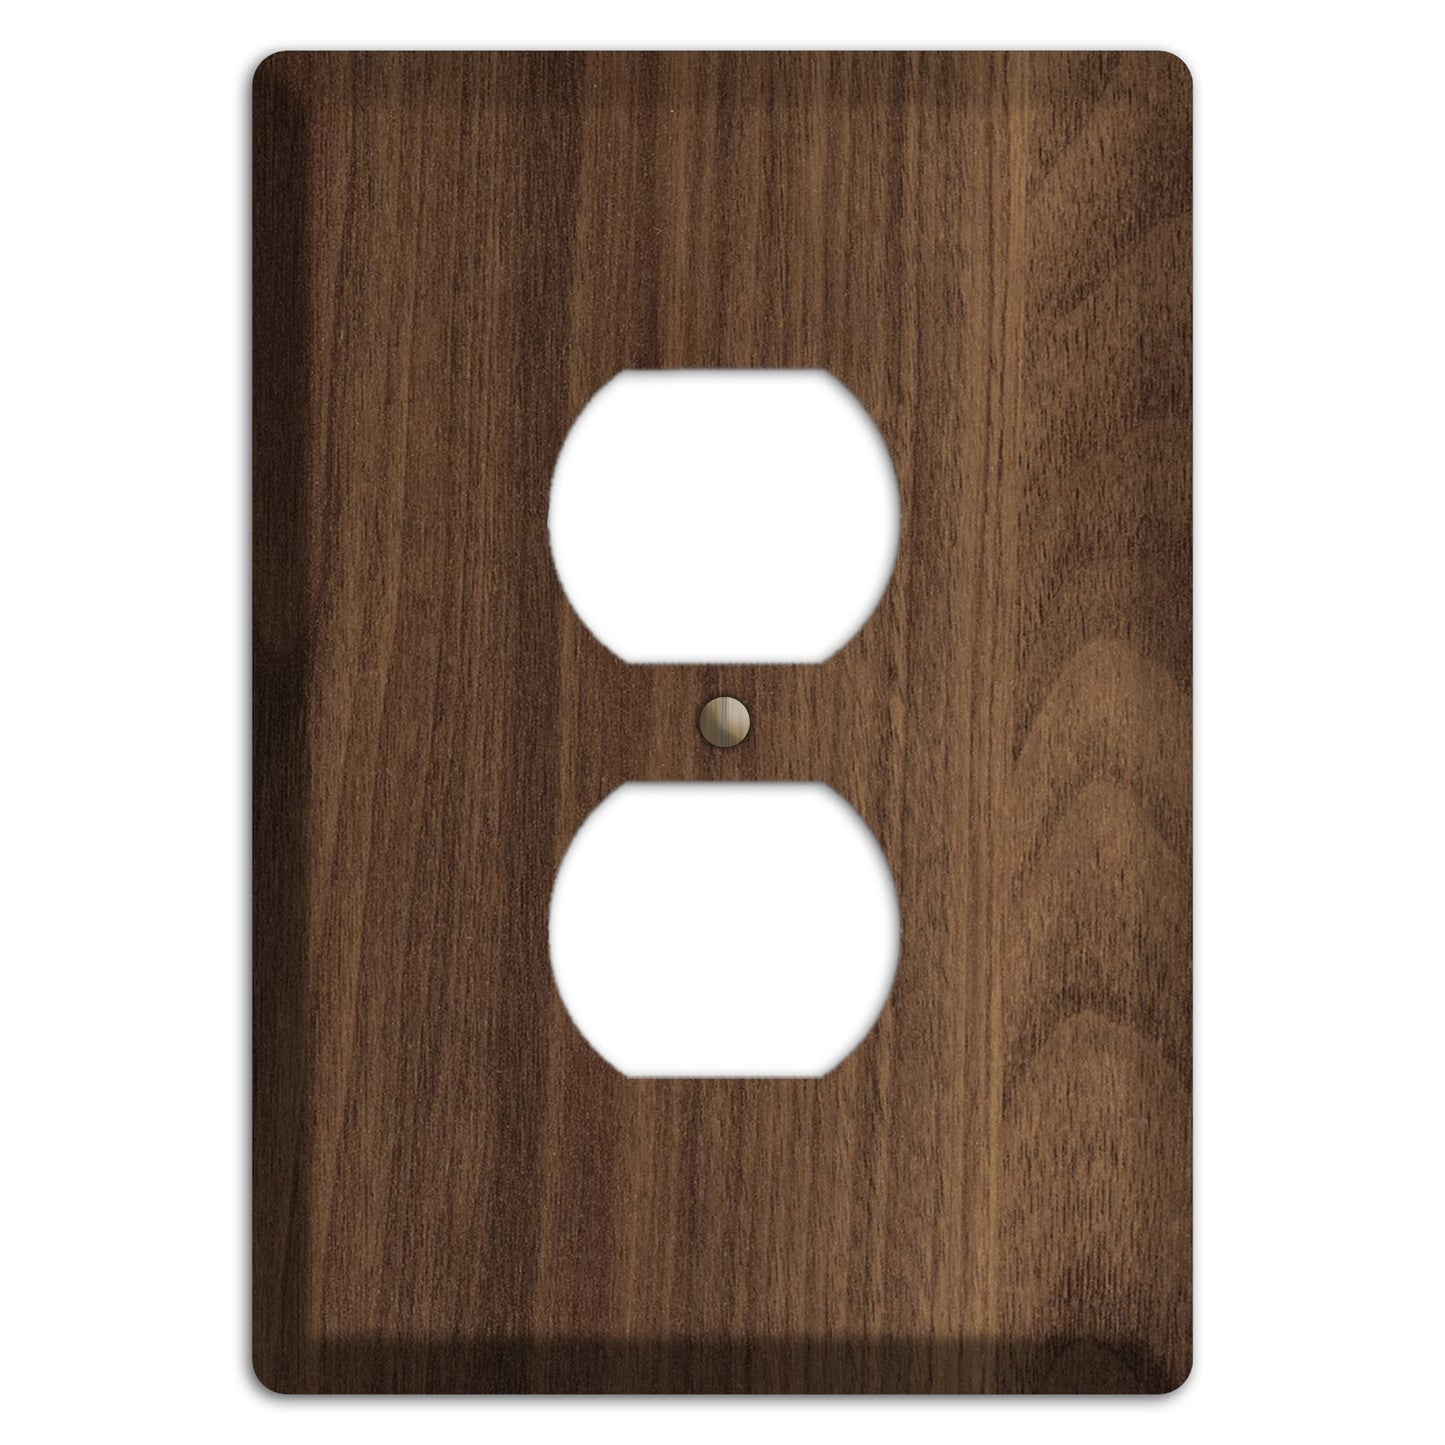 Walnut Wood Duplex Outlet Cover Plate